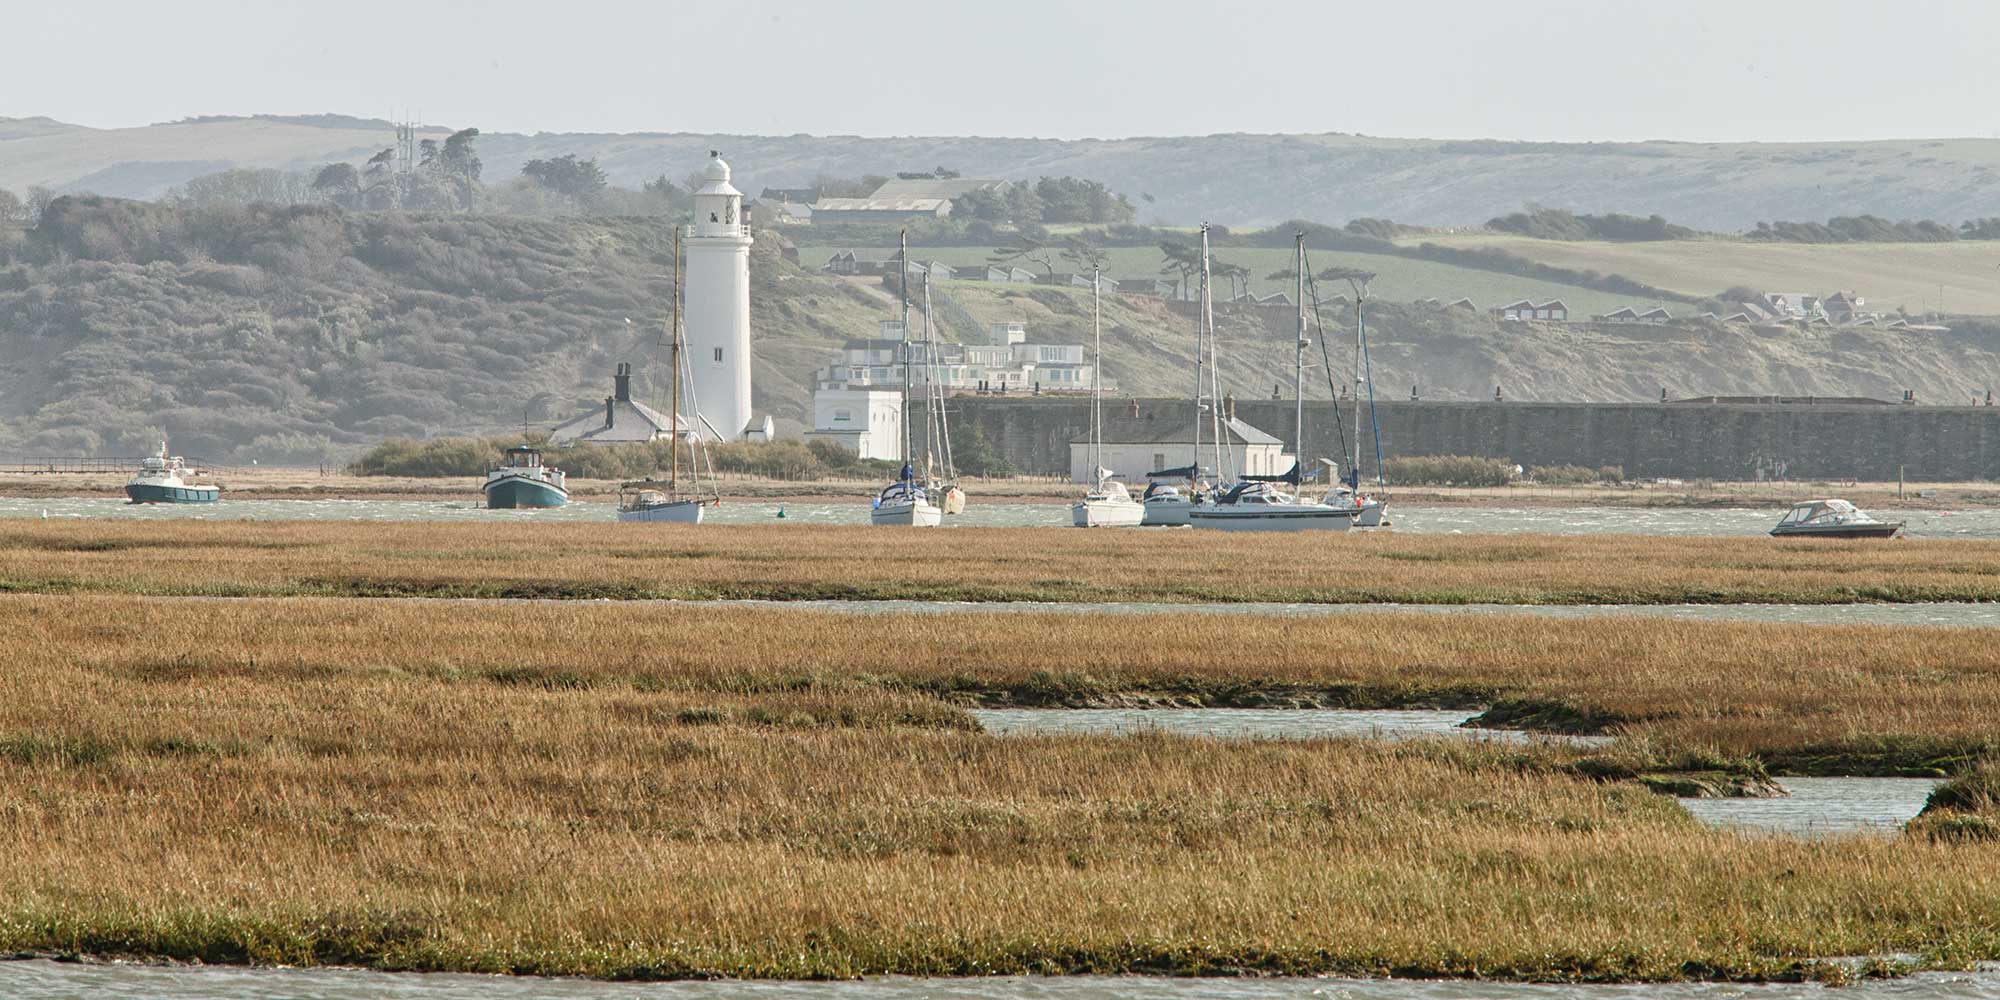 Grassy wetlands with a lighthouse and sailing boats in the distance